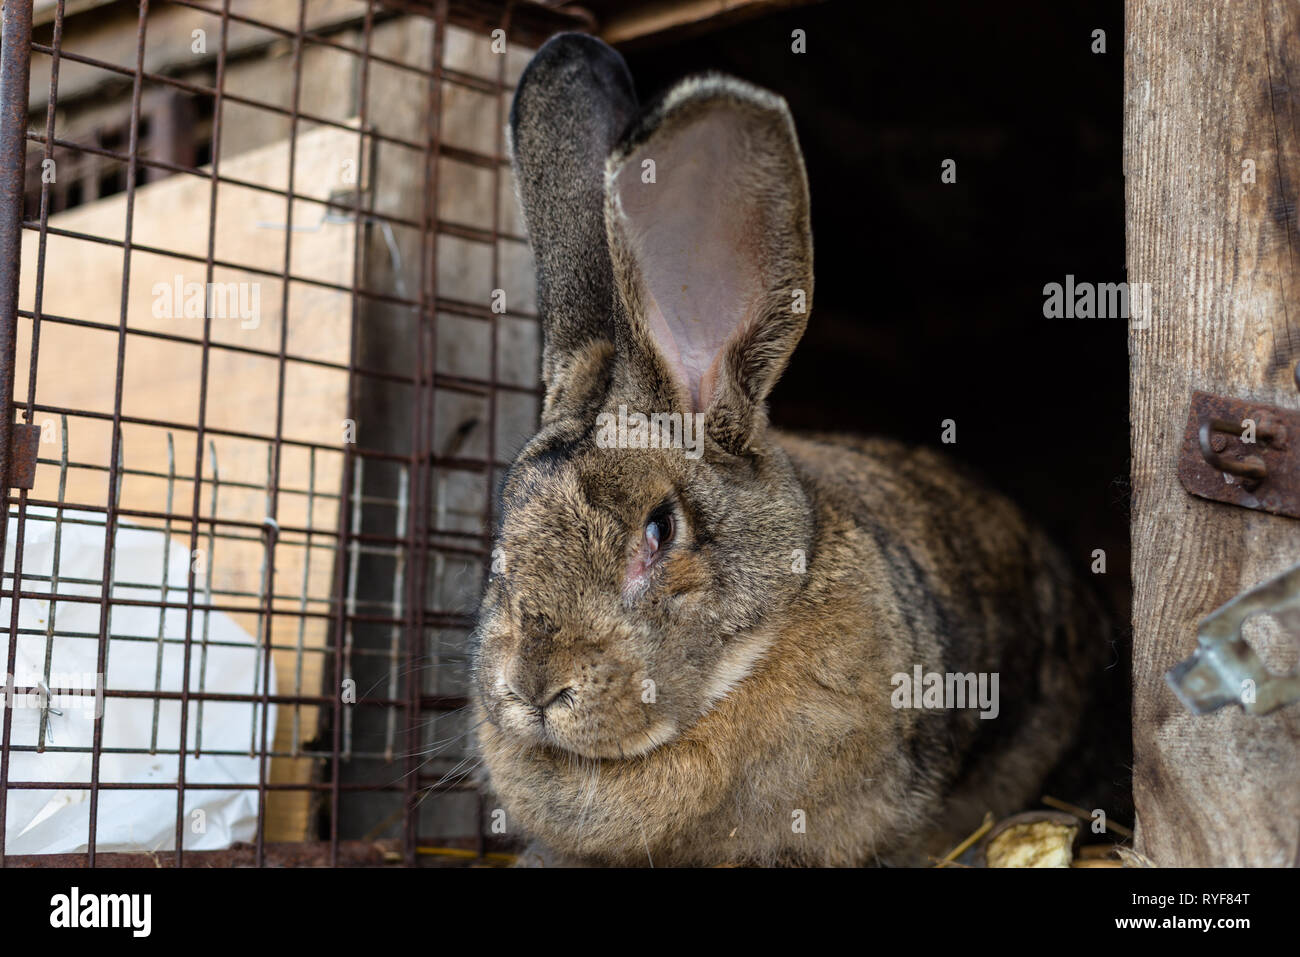 A close-up shot of a breeding rabbit standing in front of a wooden cage. Stock Photo